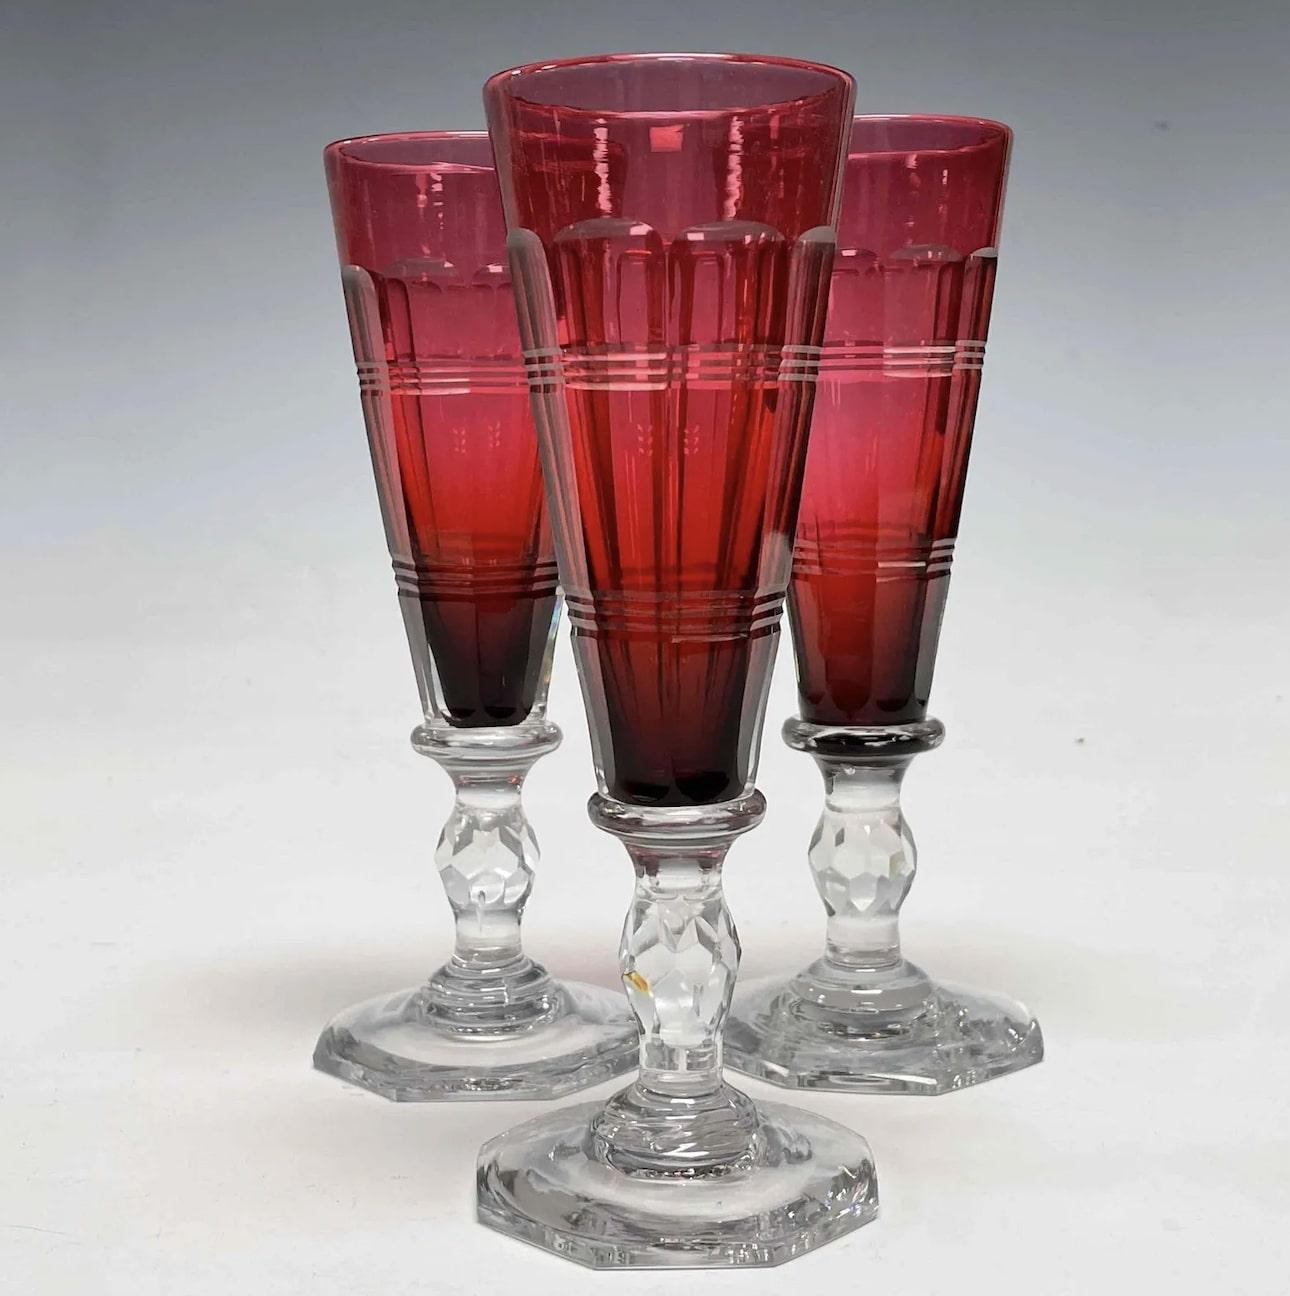 This is an amazing example of the finest hand blown crystal in the form of champagne flutes. The body is a deep cranberry that is cased in clear crystal and then decorated with an Art Deco sculptural cut decoration. The clear stem reaches down to